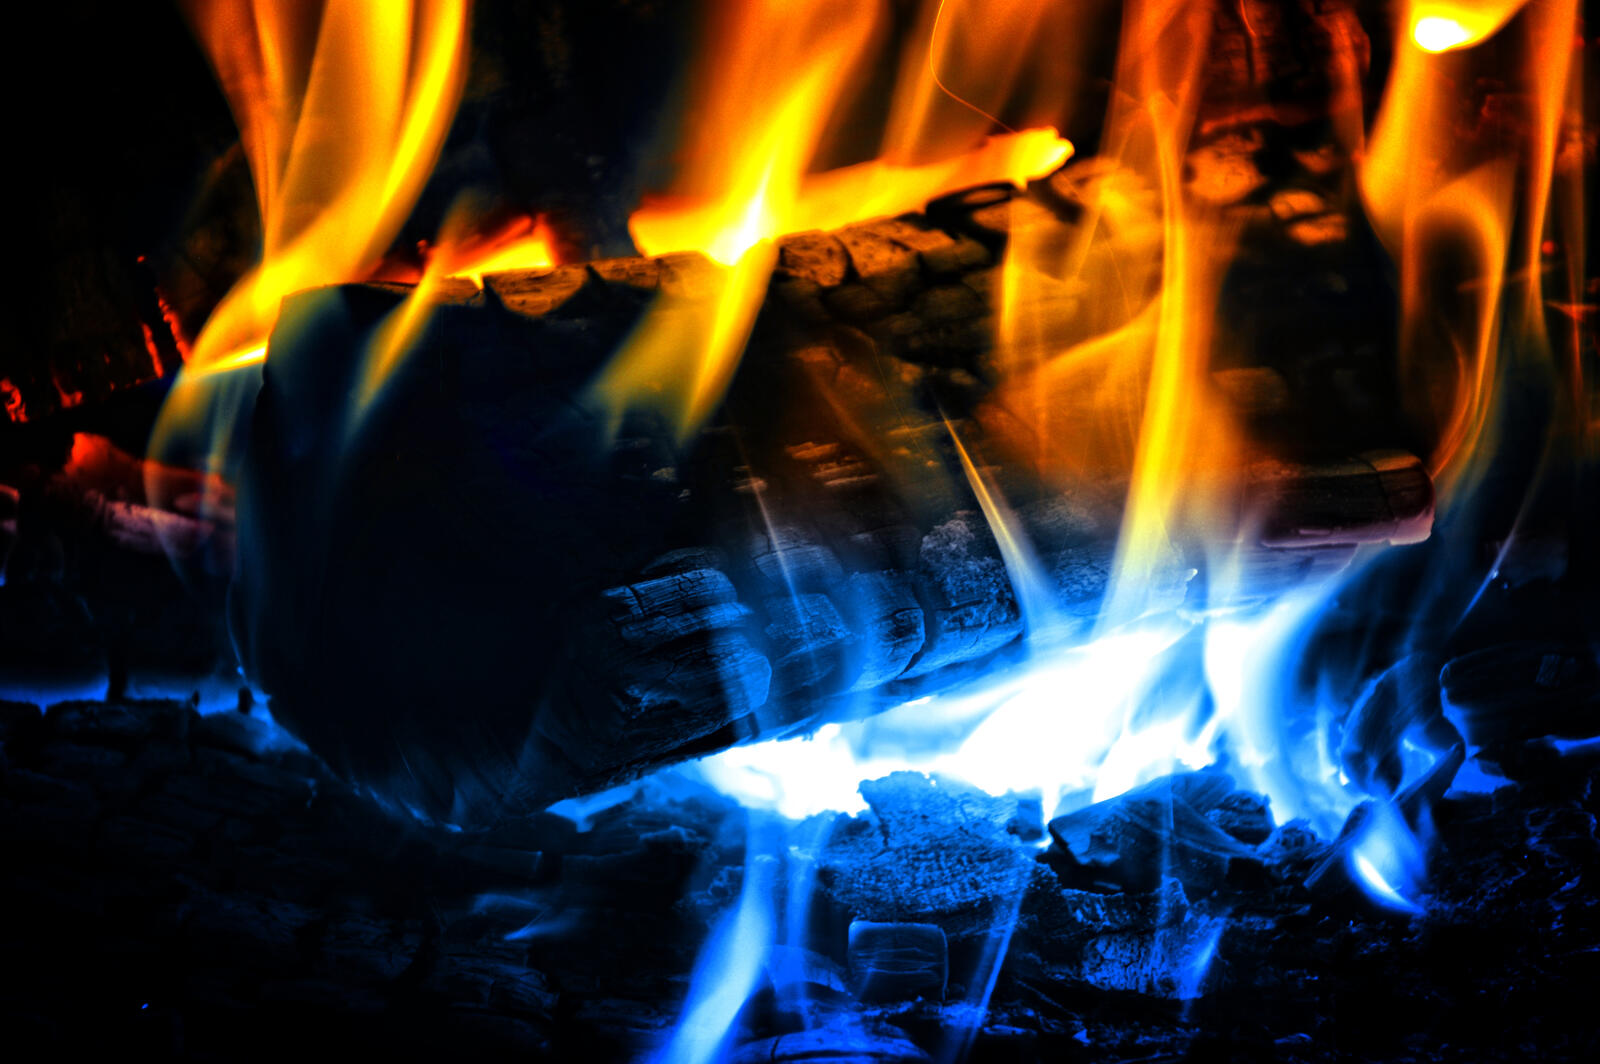 Wallpapers flame coals other on the desktop